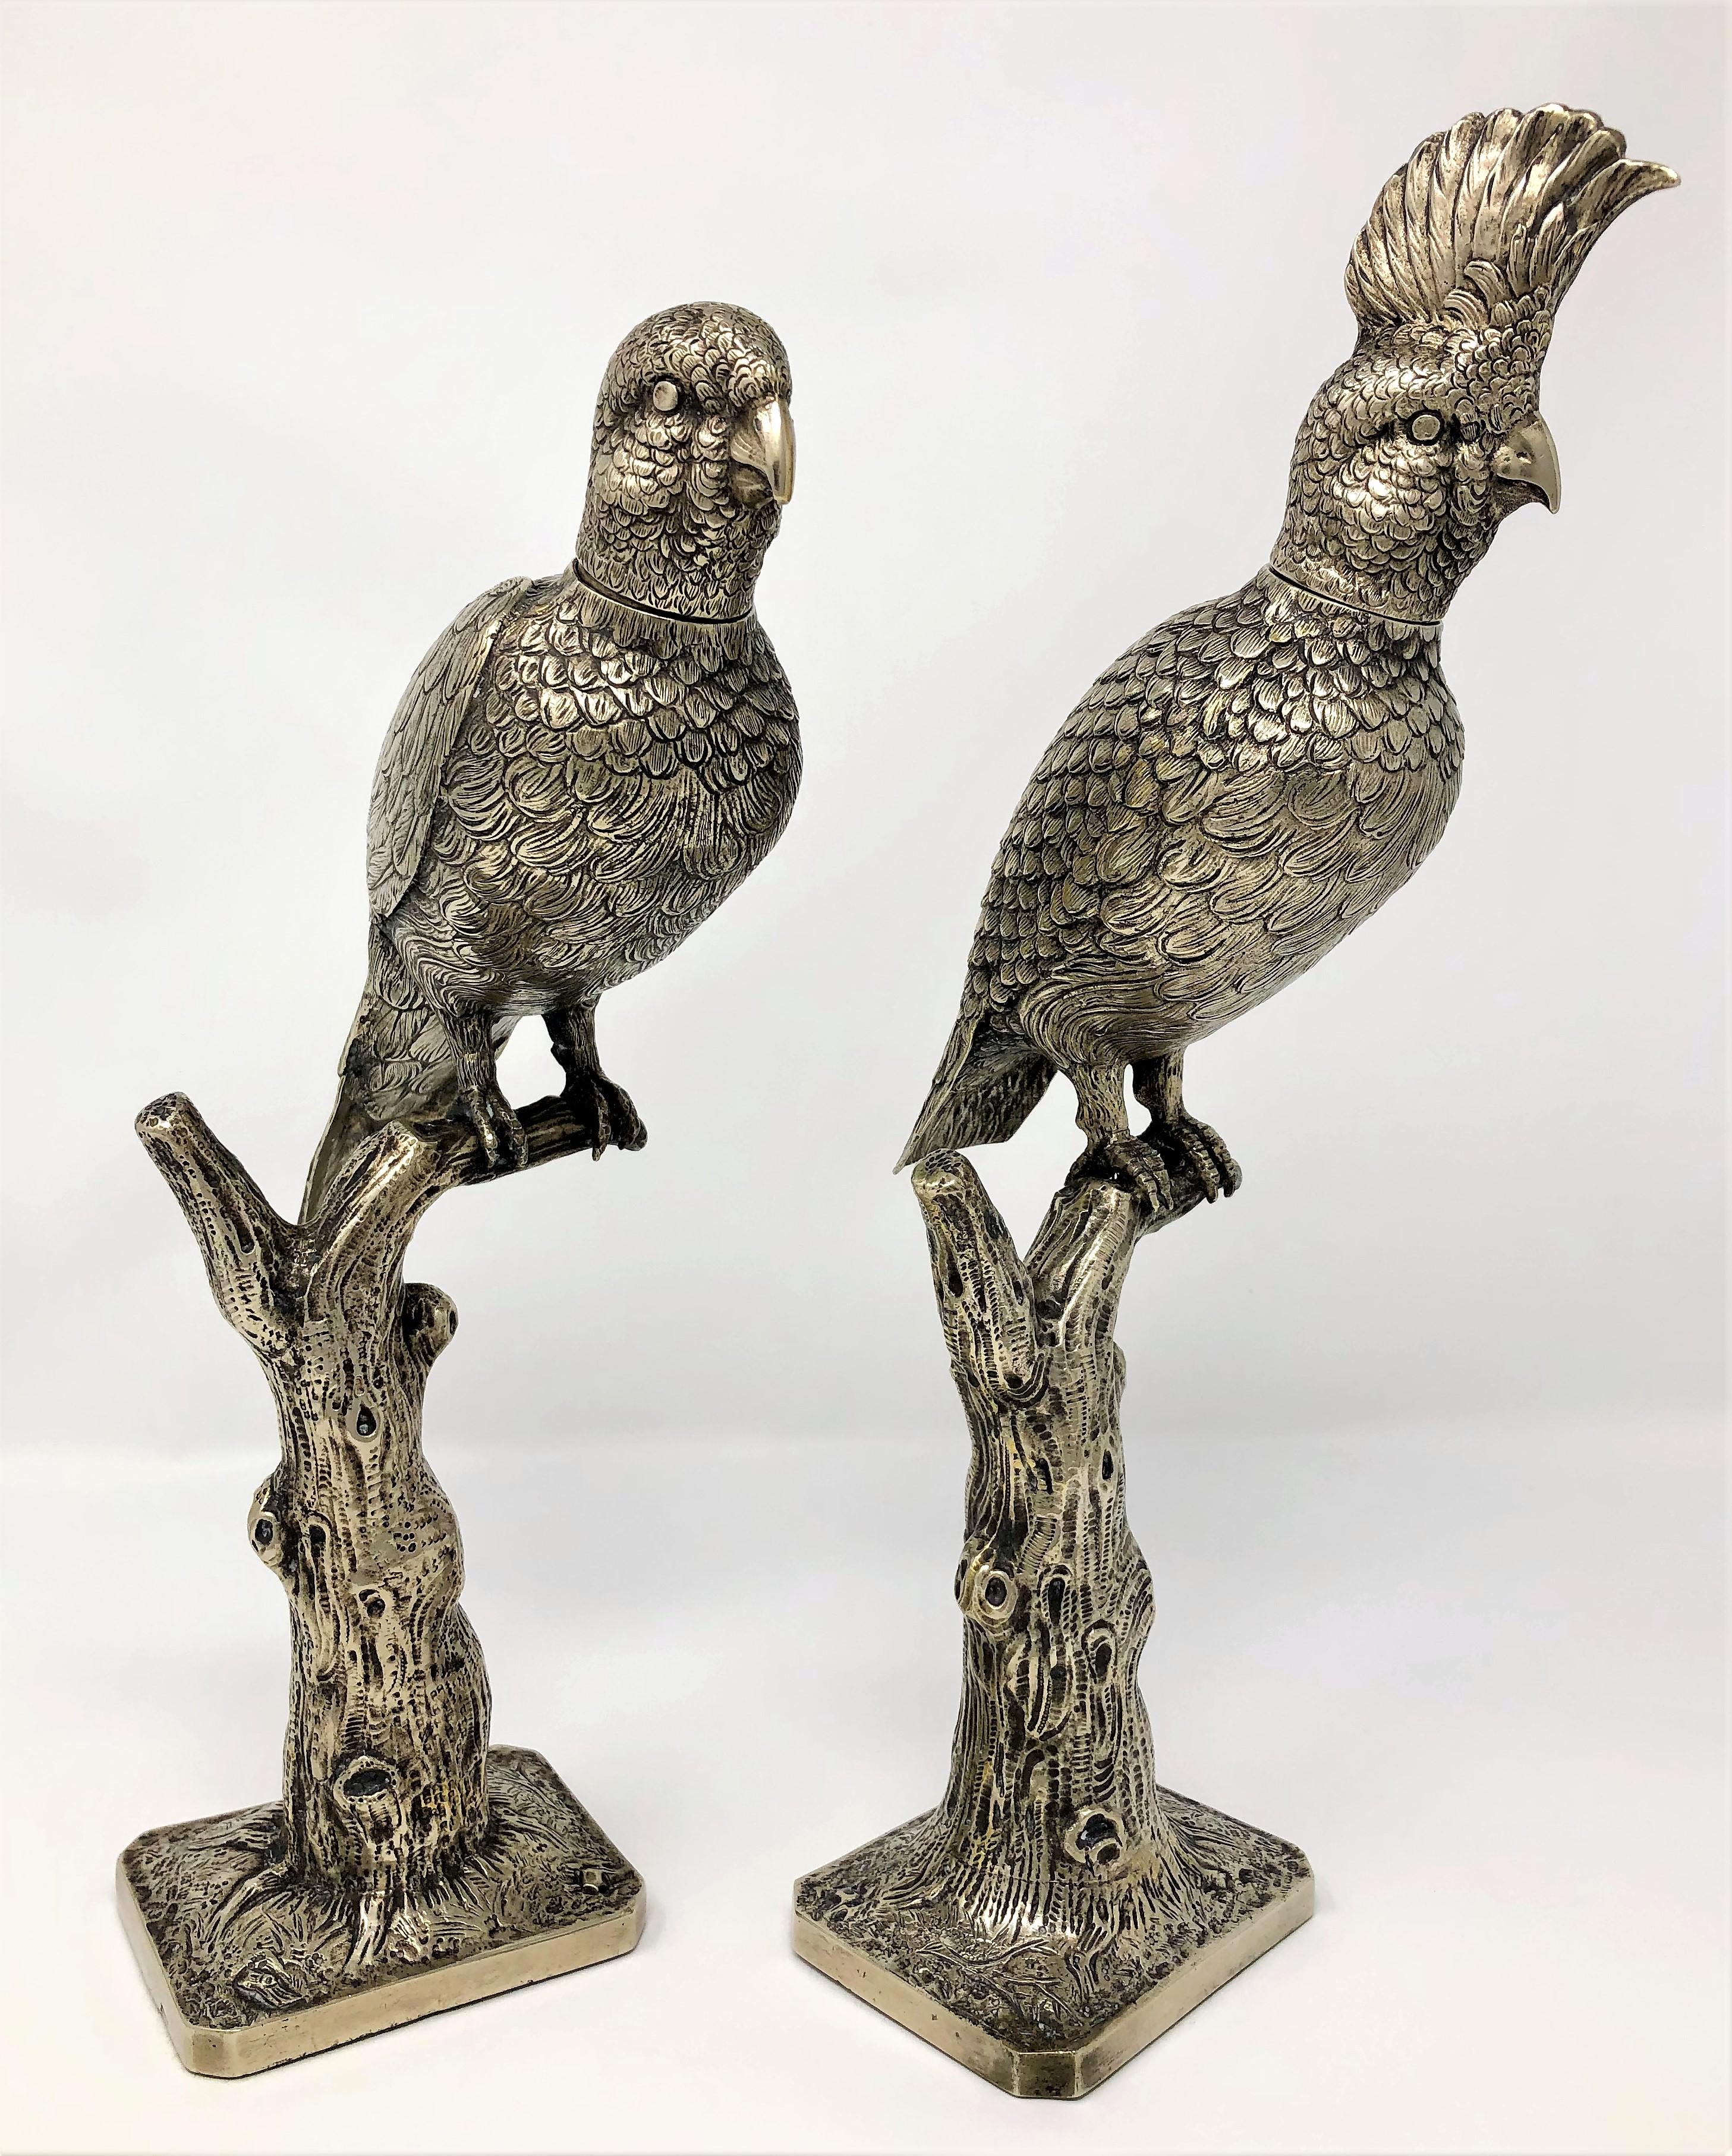 Pair of estate silver plated perching birds, circa 1930s.
Measures: Base 3